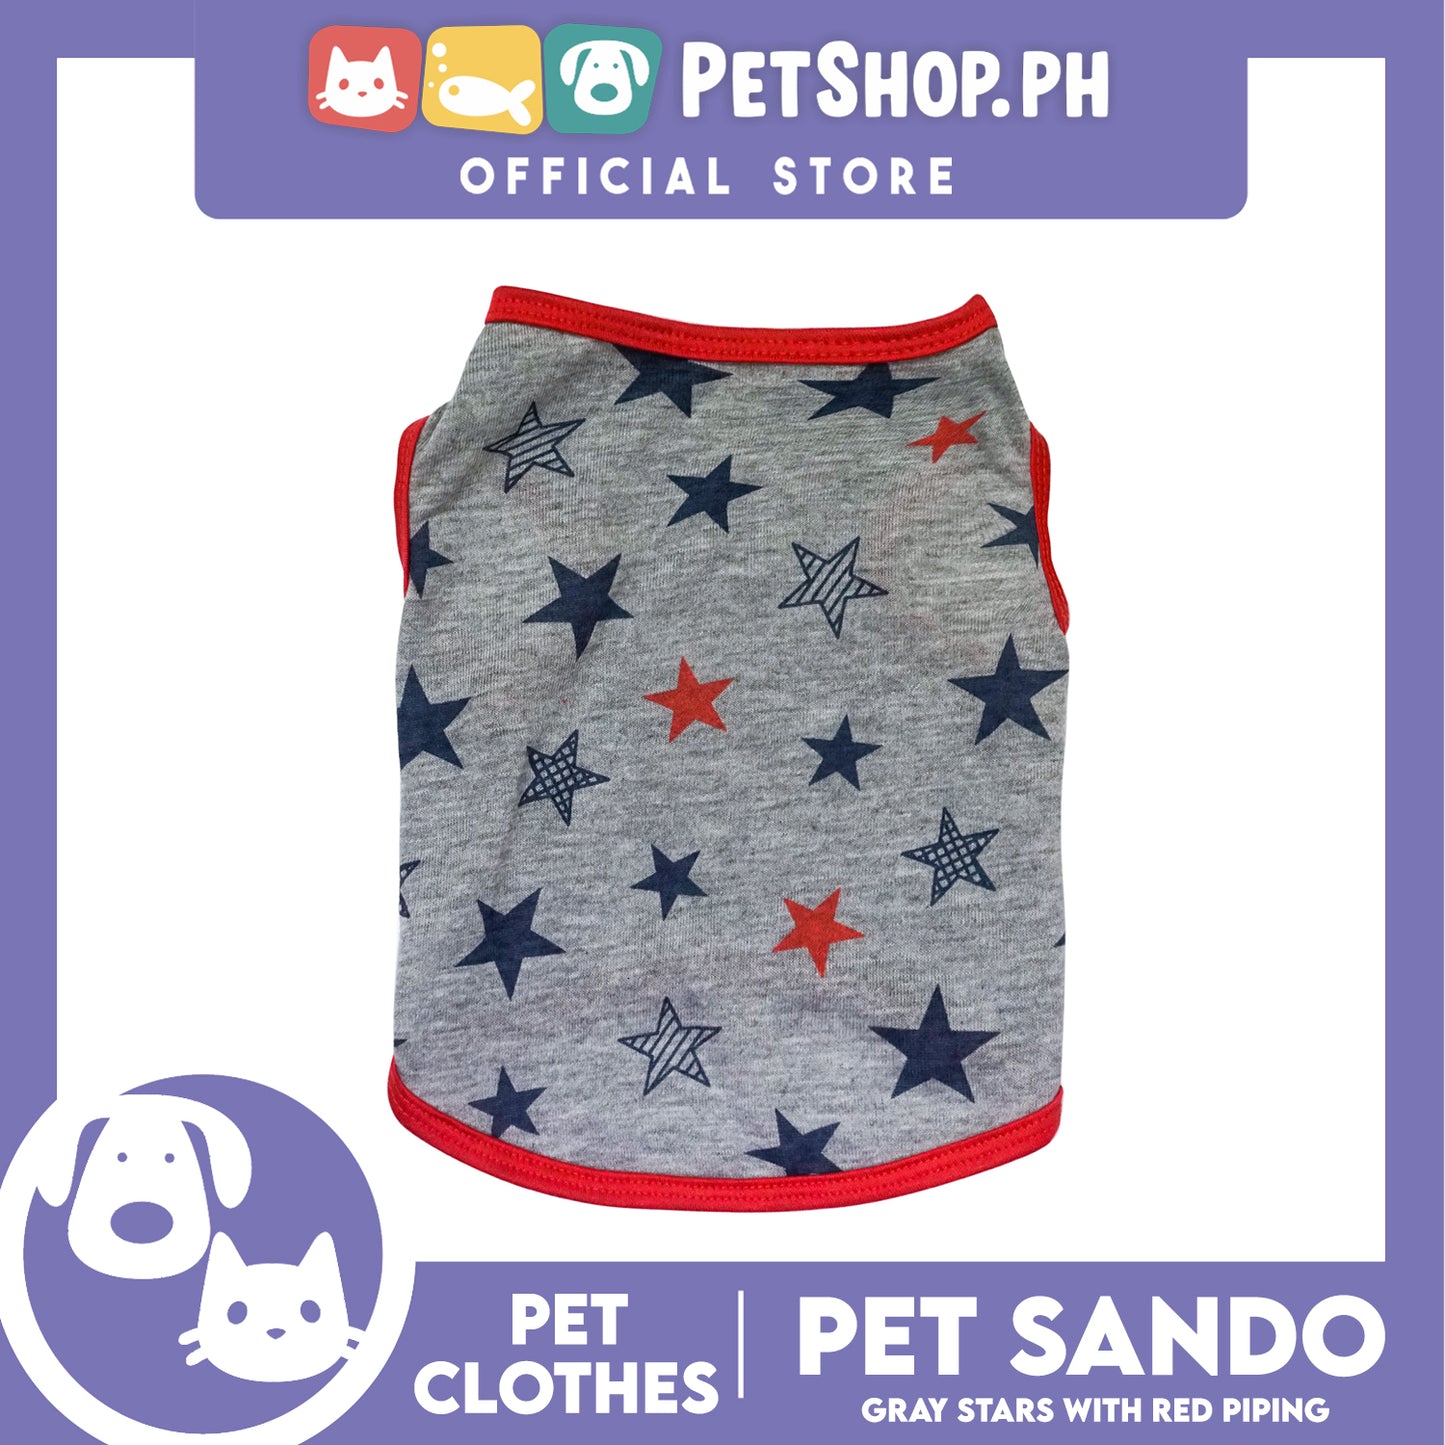 Pet Sando Gray Stars with Red Piping (Large) Pet Shirt Clothes Perfect fit for Dogs